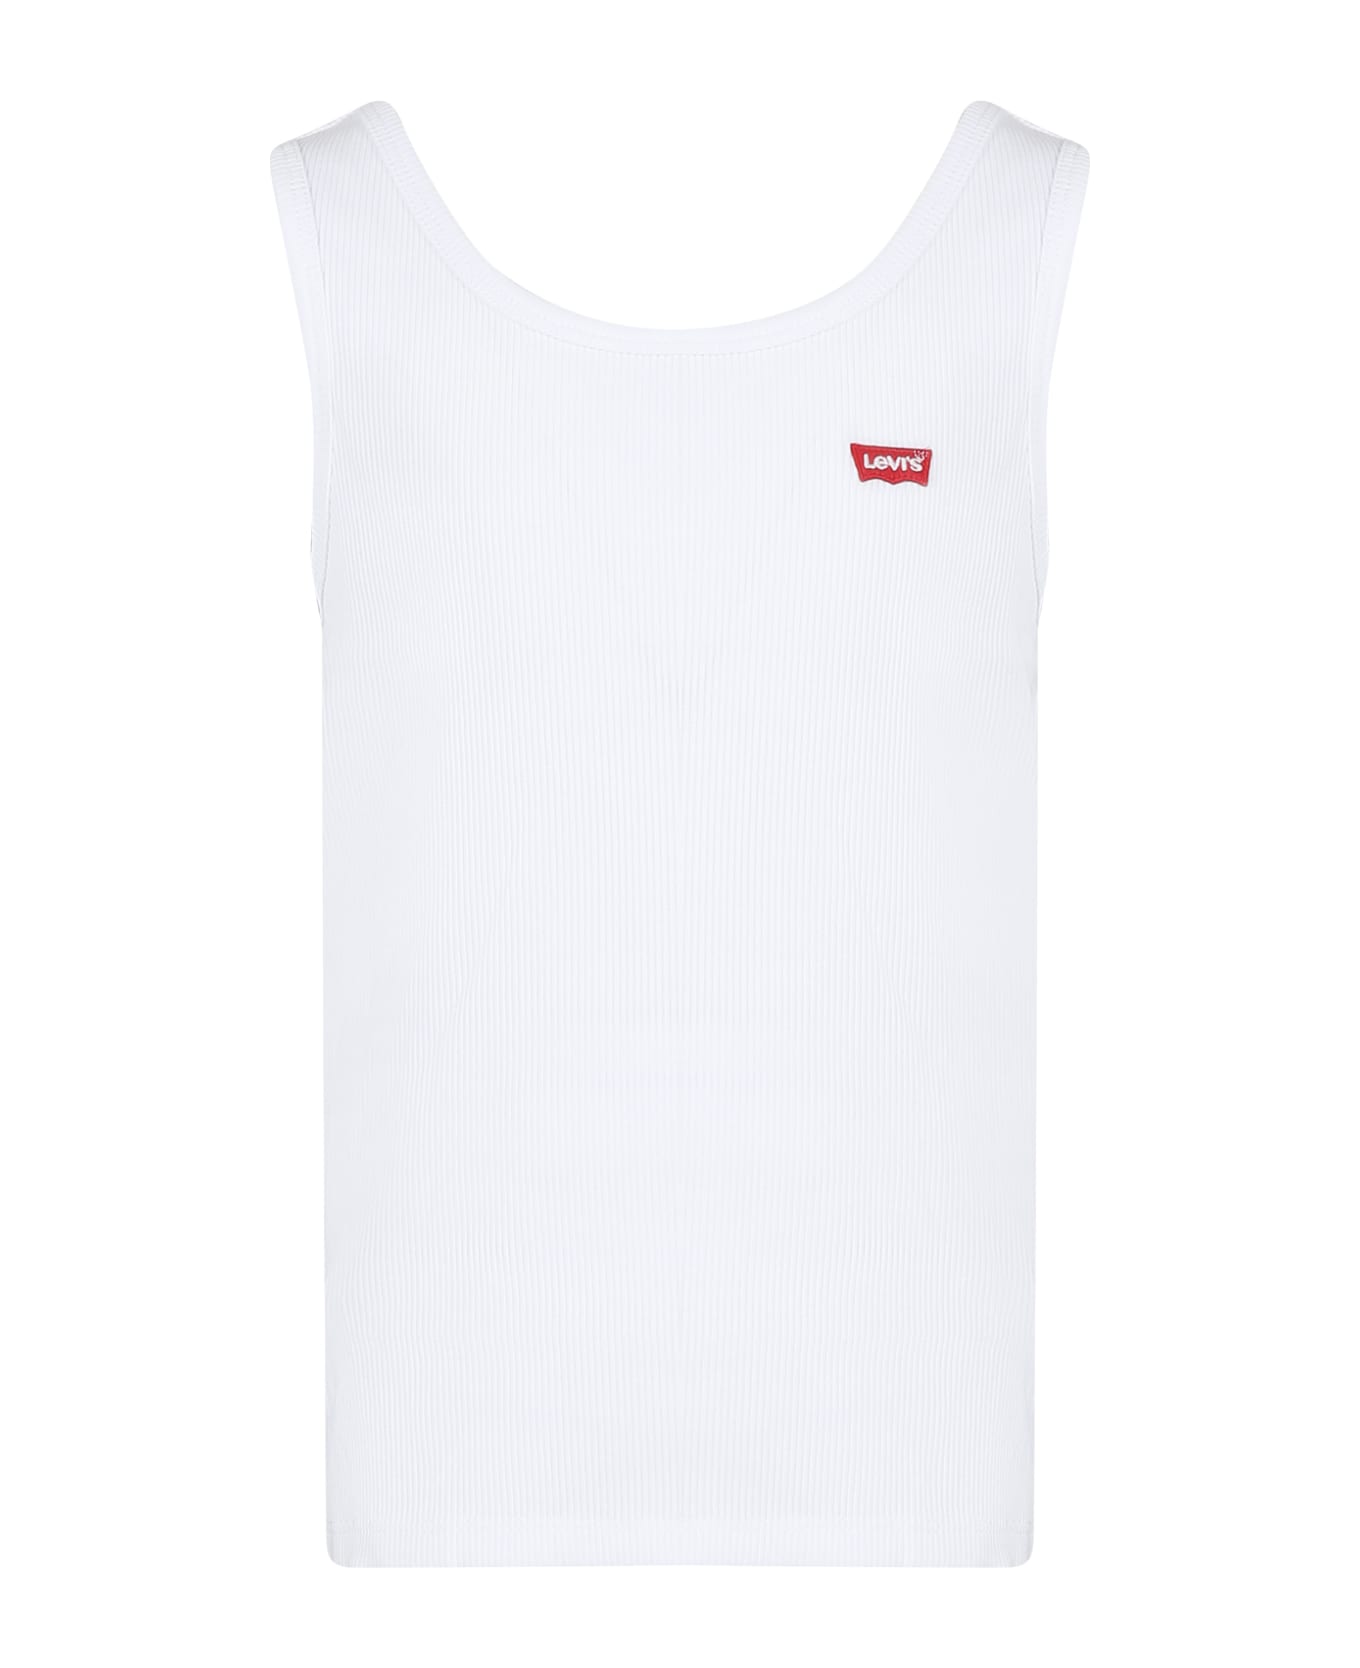 Levi's White Tank Top For Girl With Logo - White